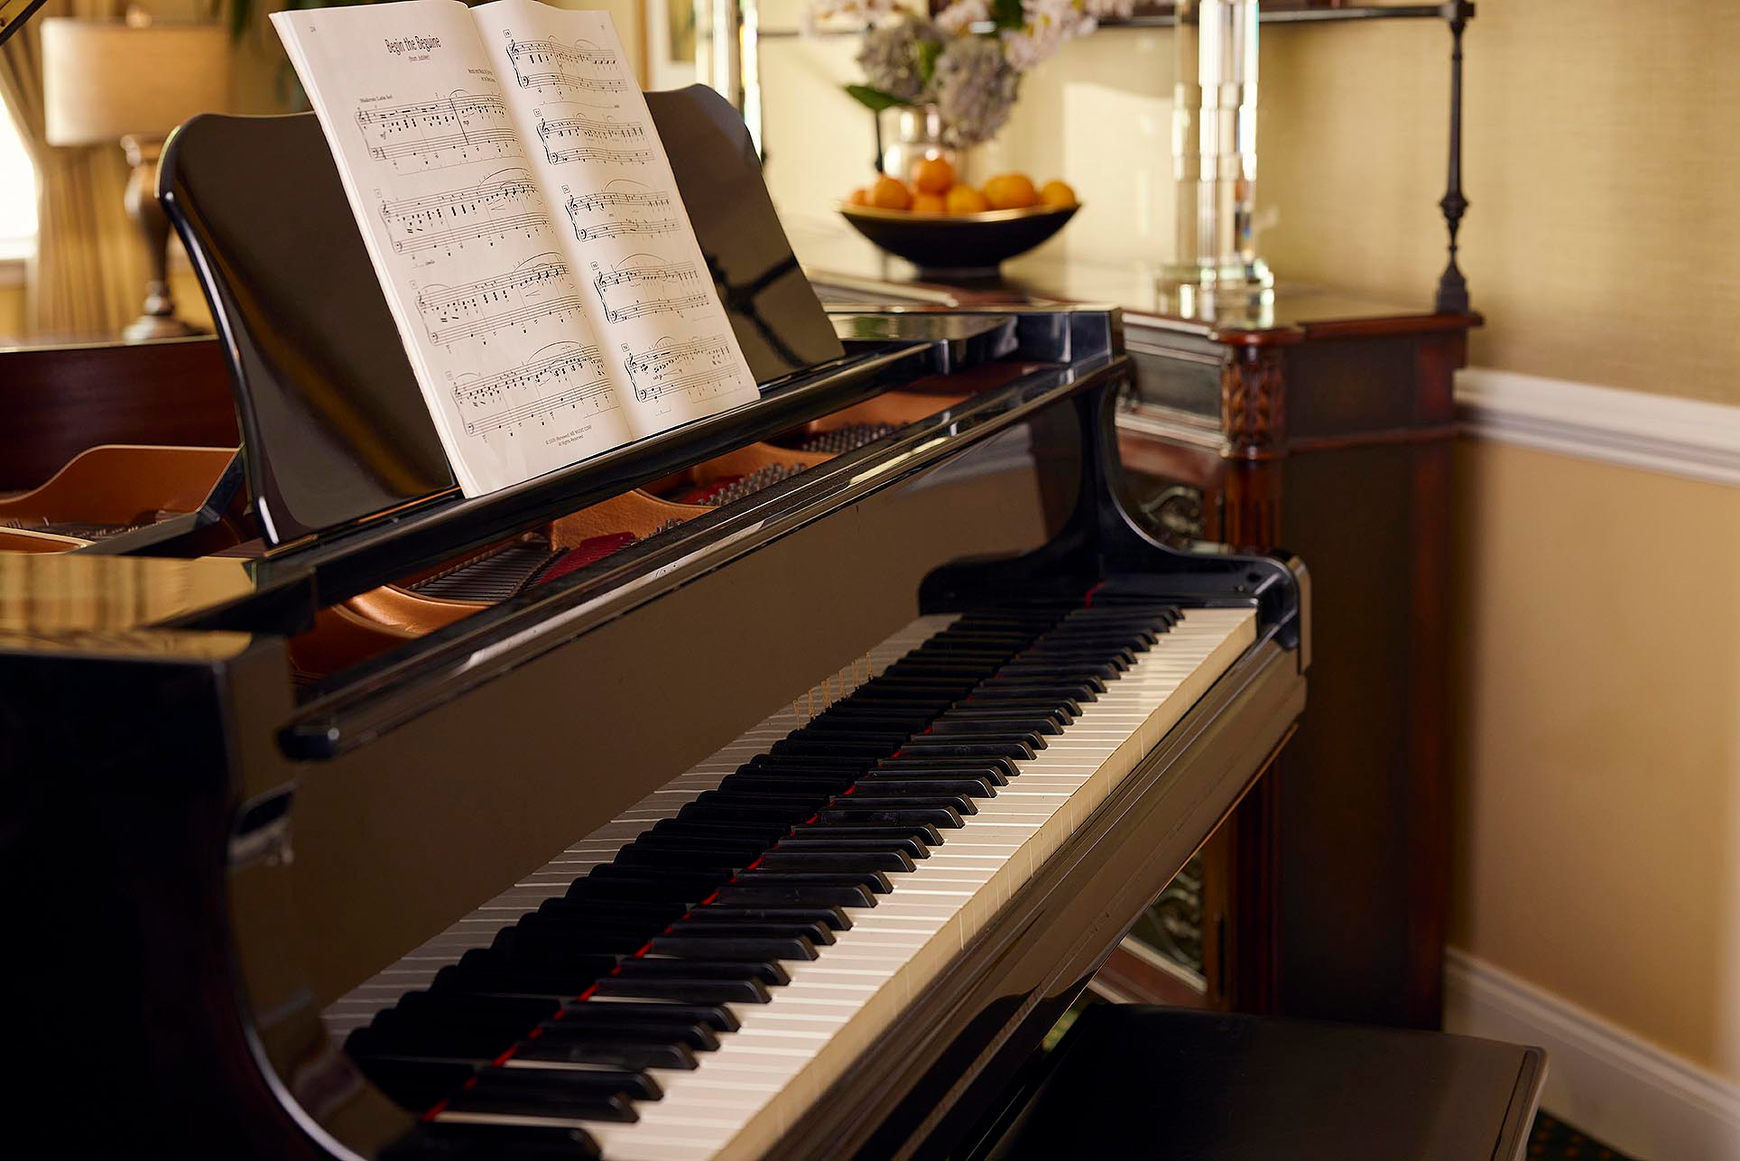 A piano and sheet music ready for an afternoon sing along